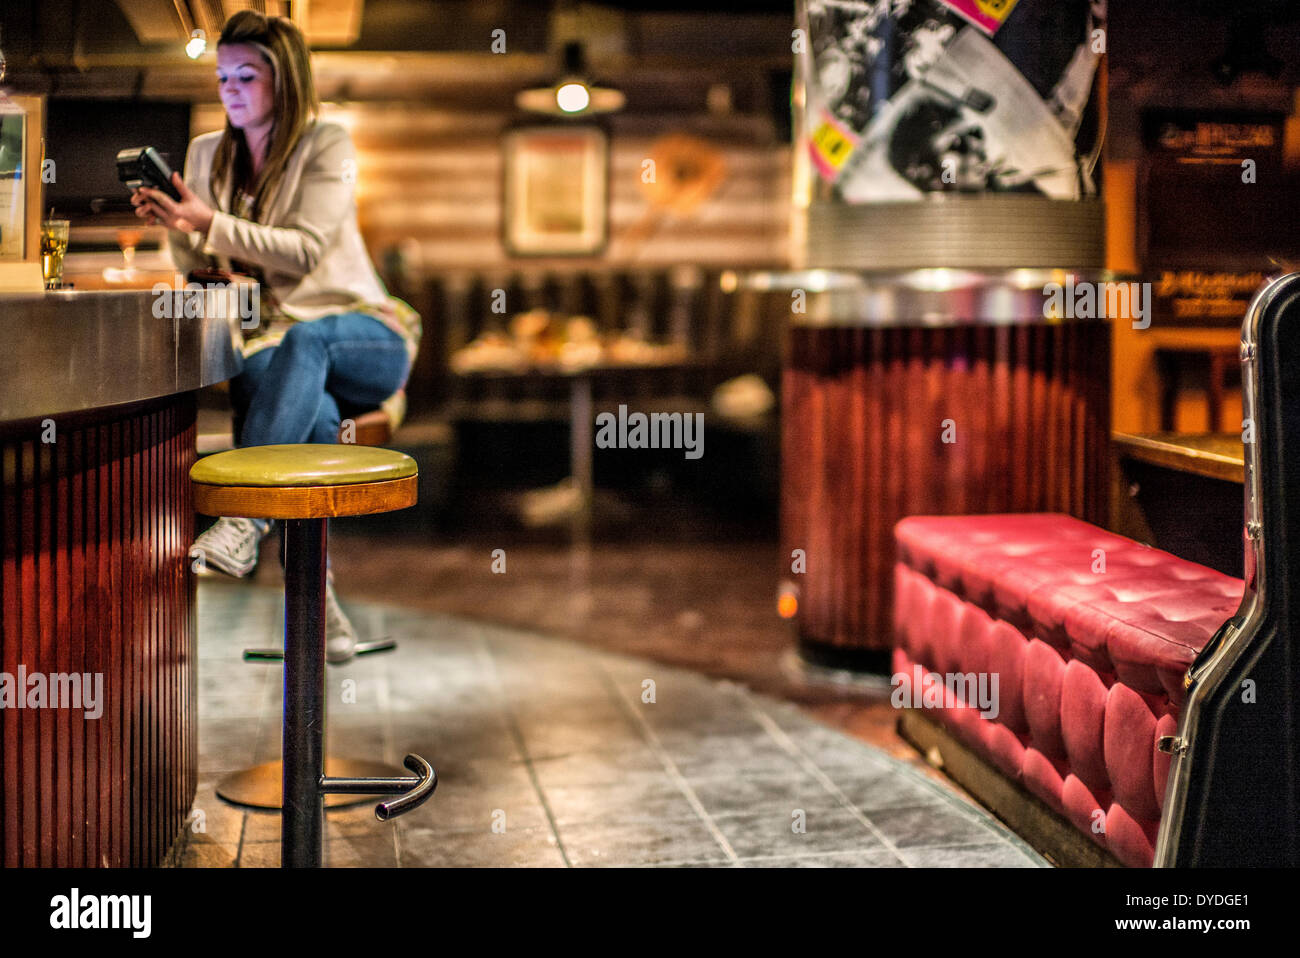 A girl paying by card in a bar. Stock Photo